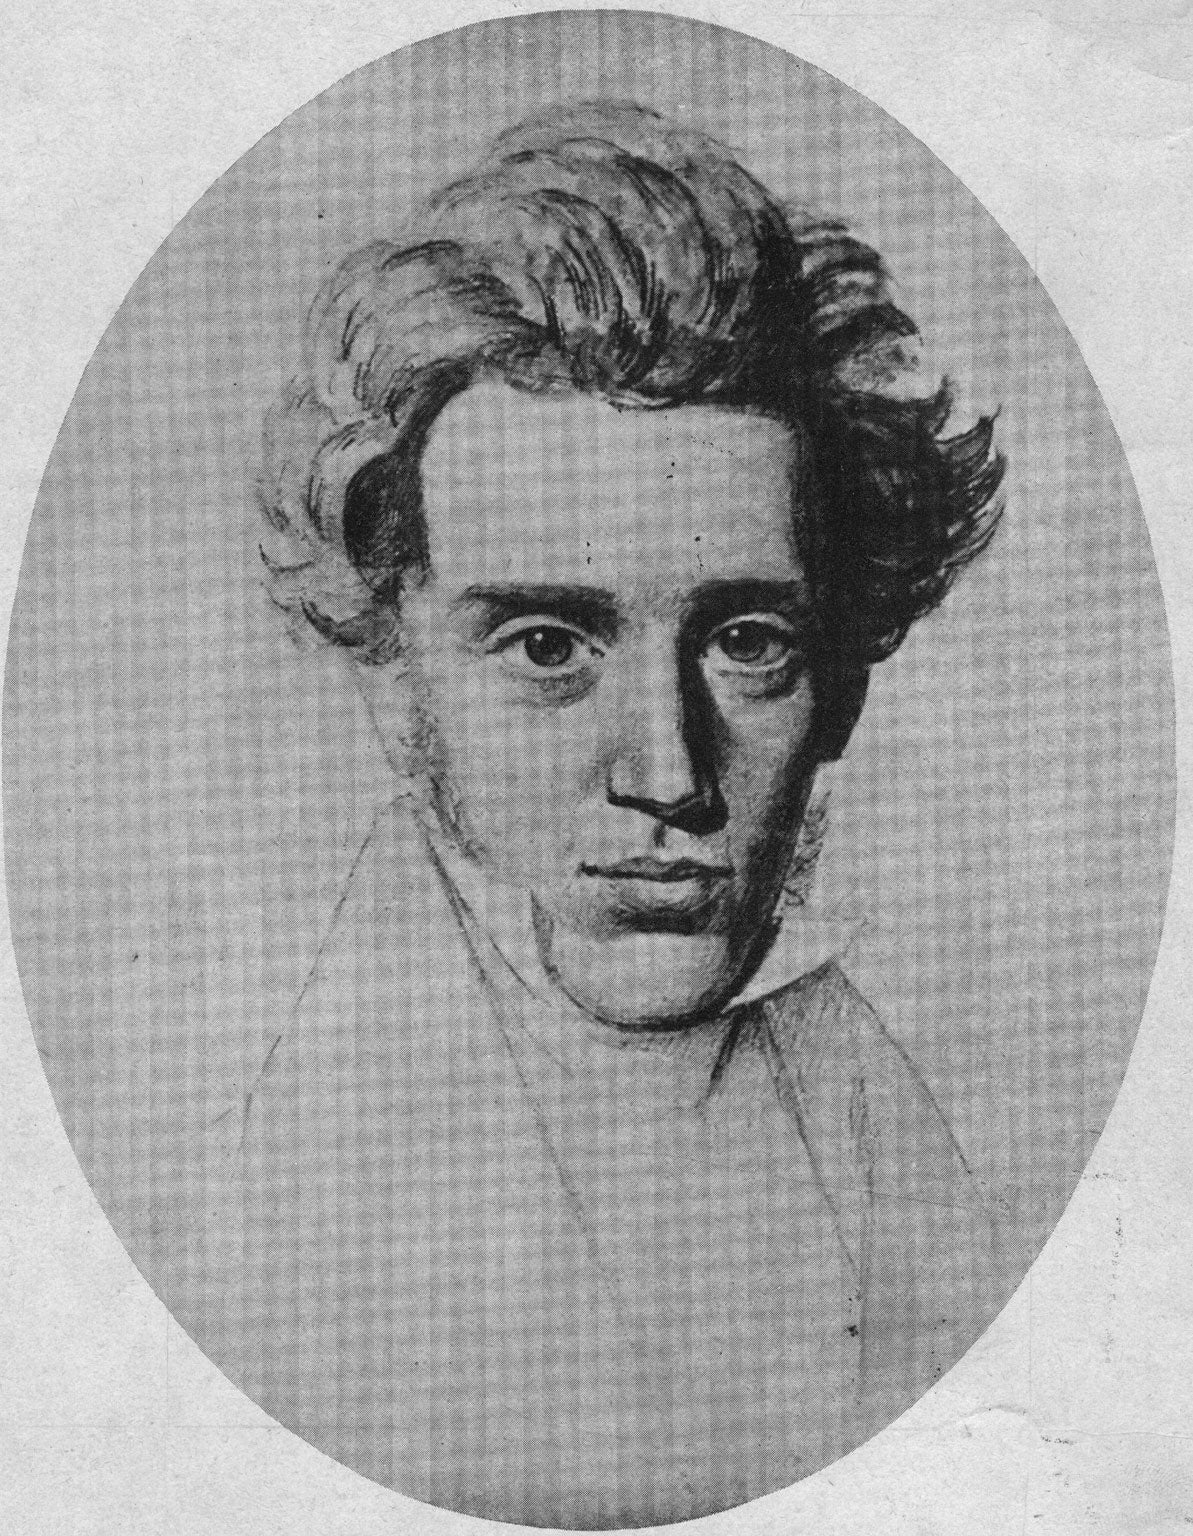 Søren Aabye Kierkegaard was born on the May 5th 1813 and is considered one of the most significant and prolific writers of the Danish “golden age” of intellectual and artistic activity.